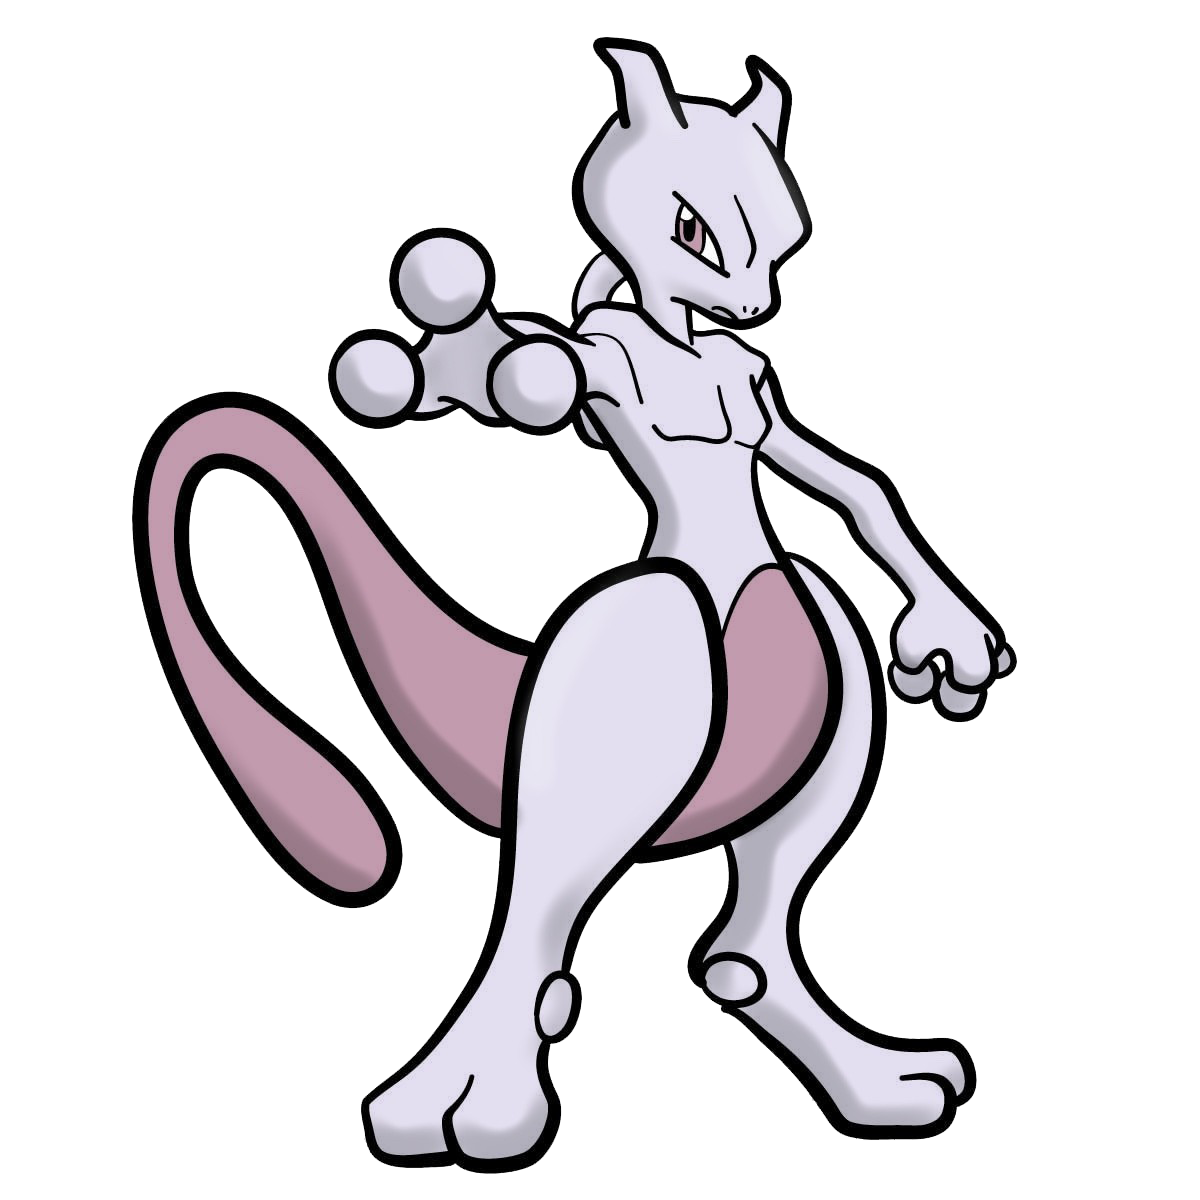 Download PNG image - Mewtwo Pokemon PNG Image Background 